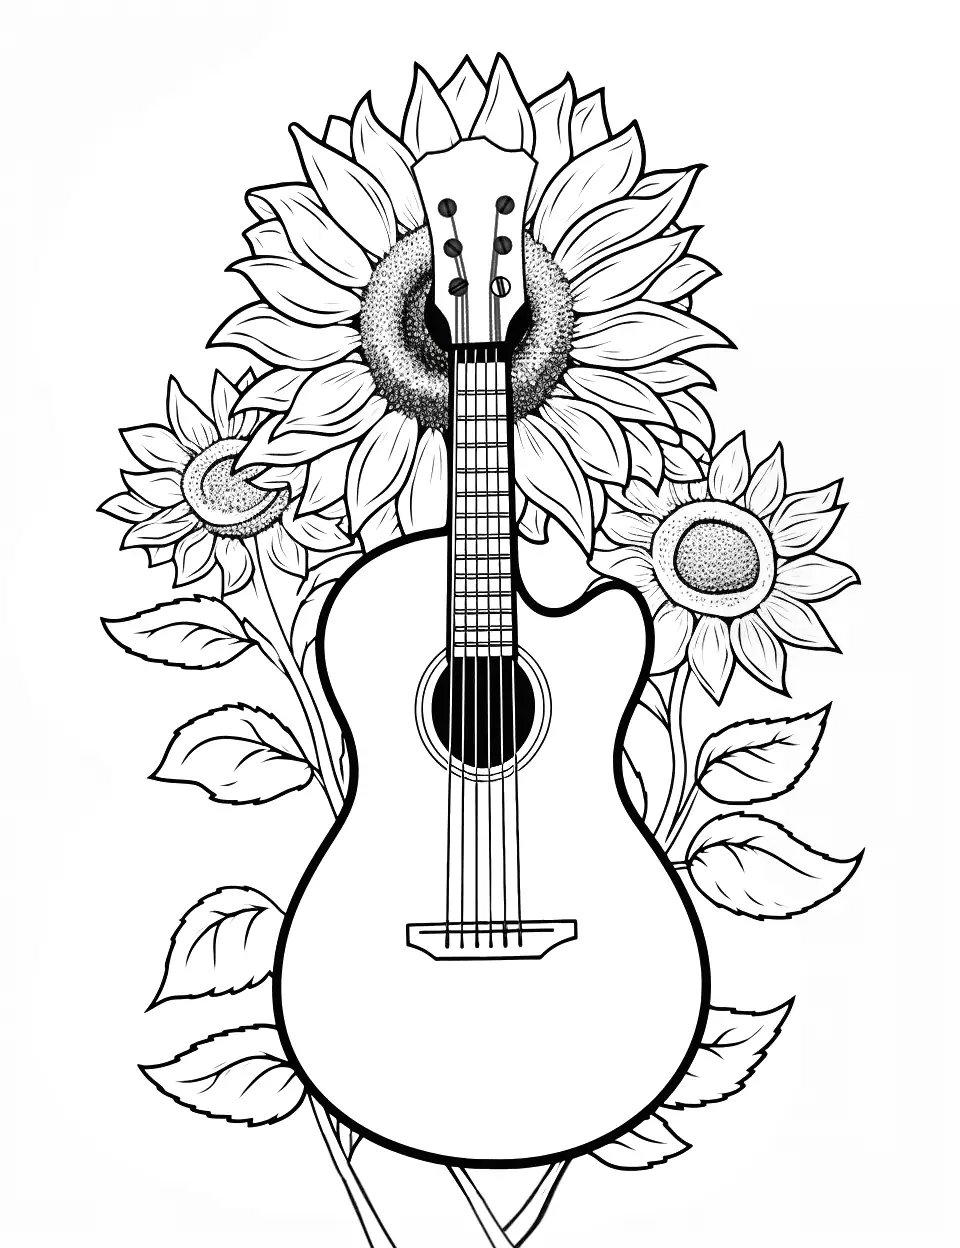 Sunflower and Guitar Coloring Page - An artsy design of sunflowers behind an acoustic guitar.